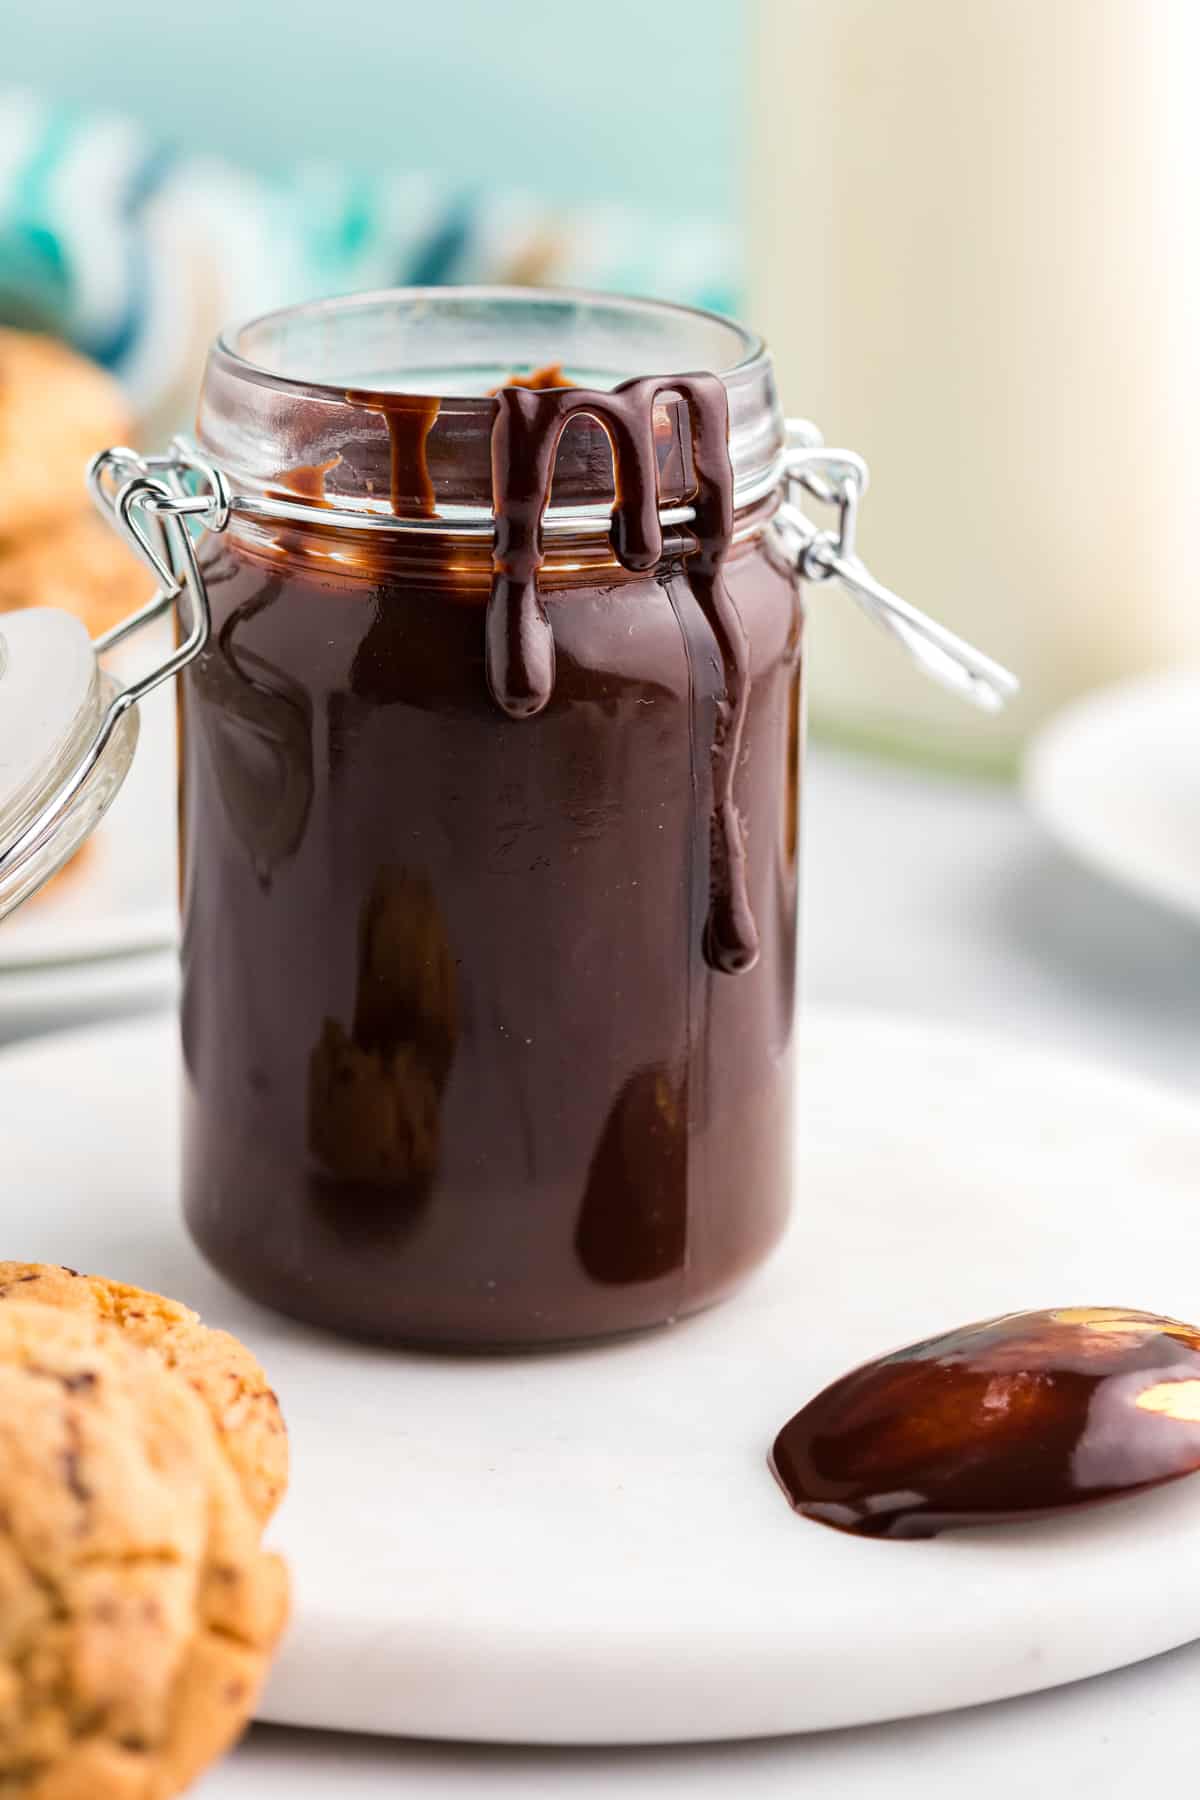 A jar of hot fudge sauce has a little drizzle on the outside of it.